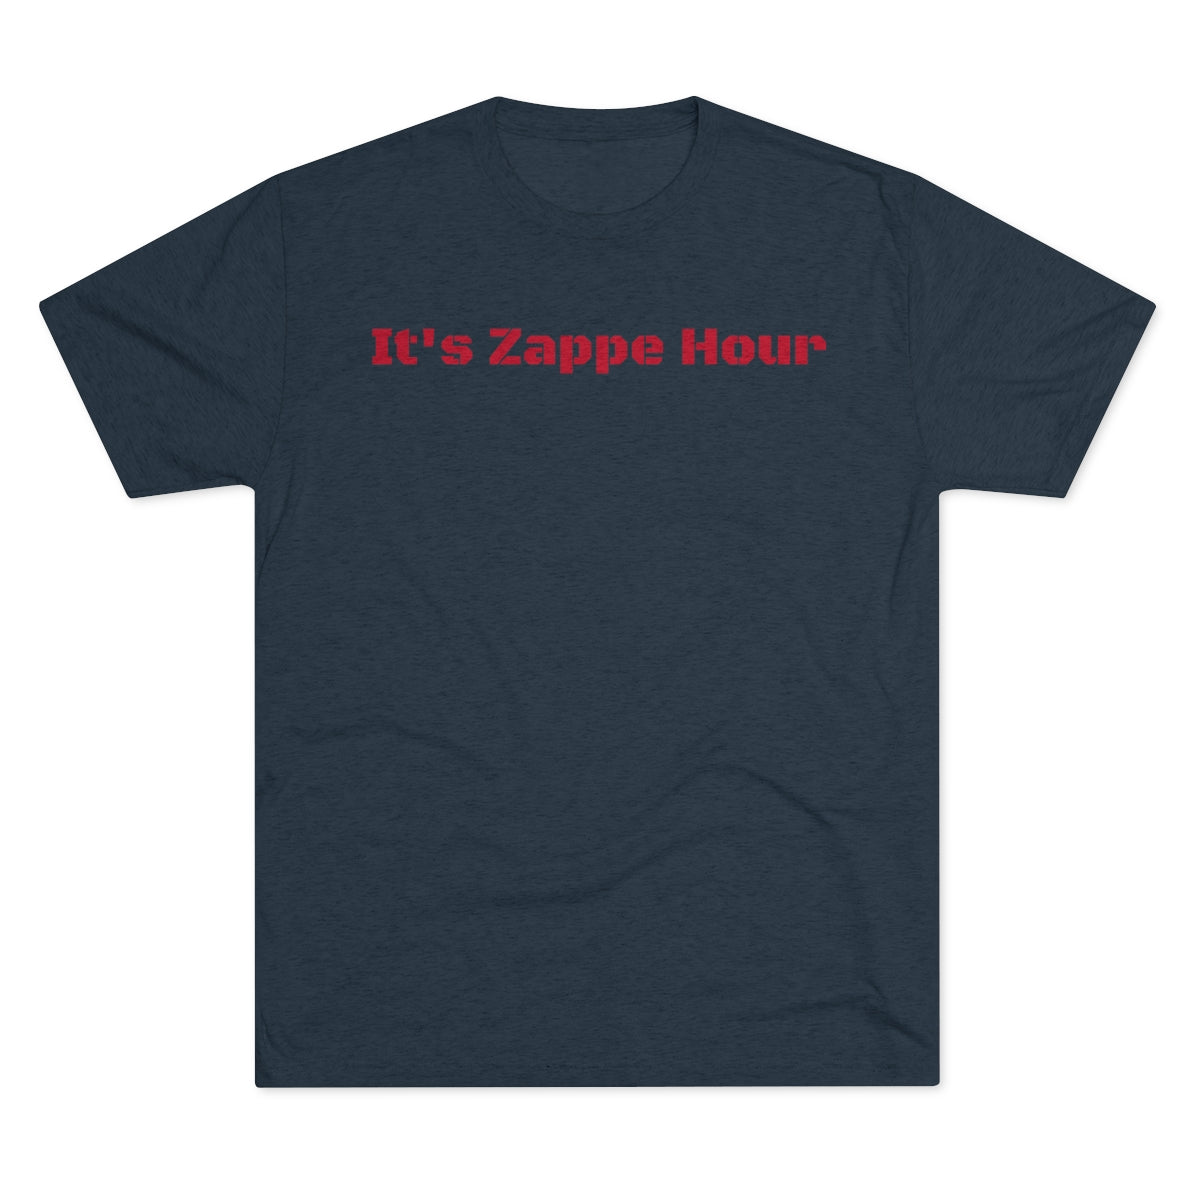 It's Zappe Hour Shirt - IsGoodBrand